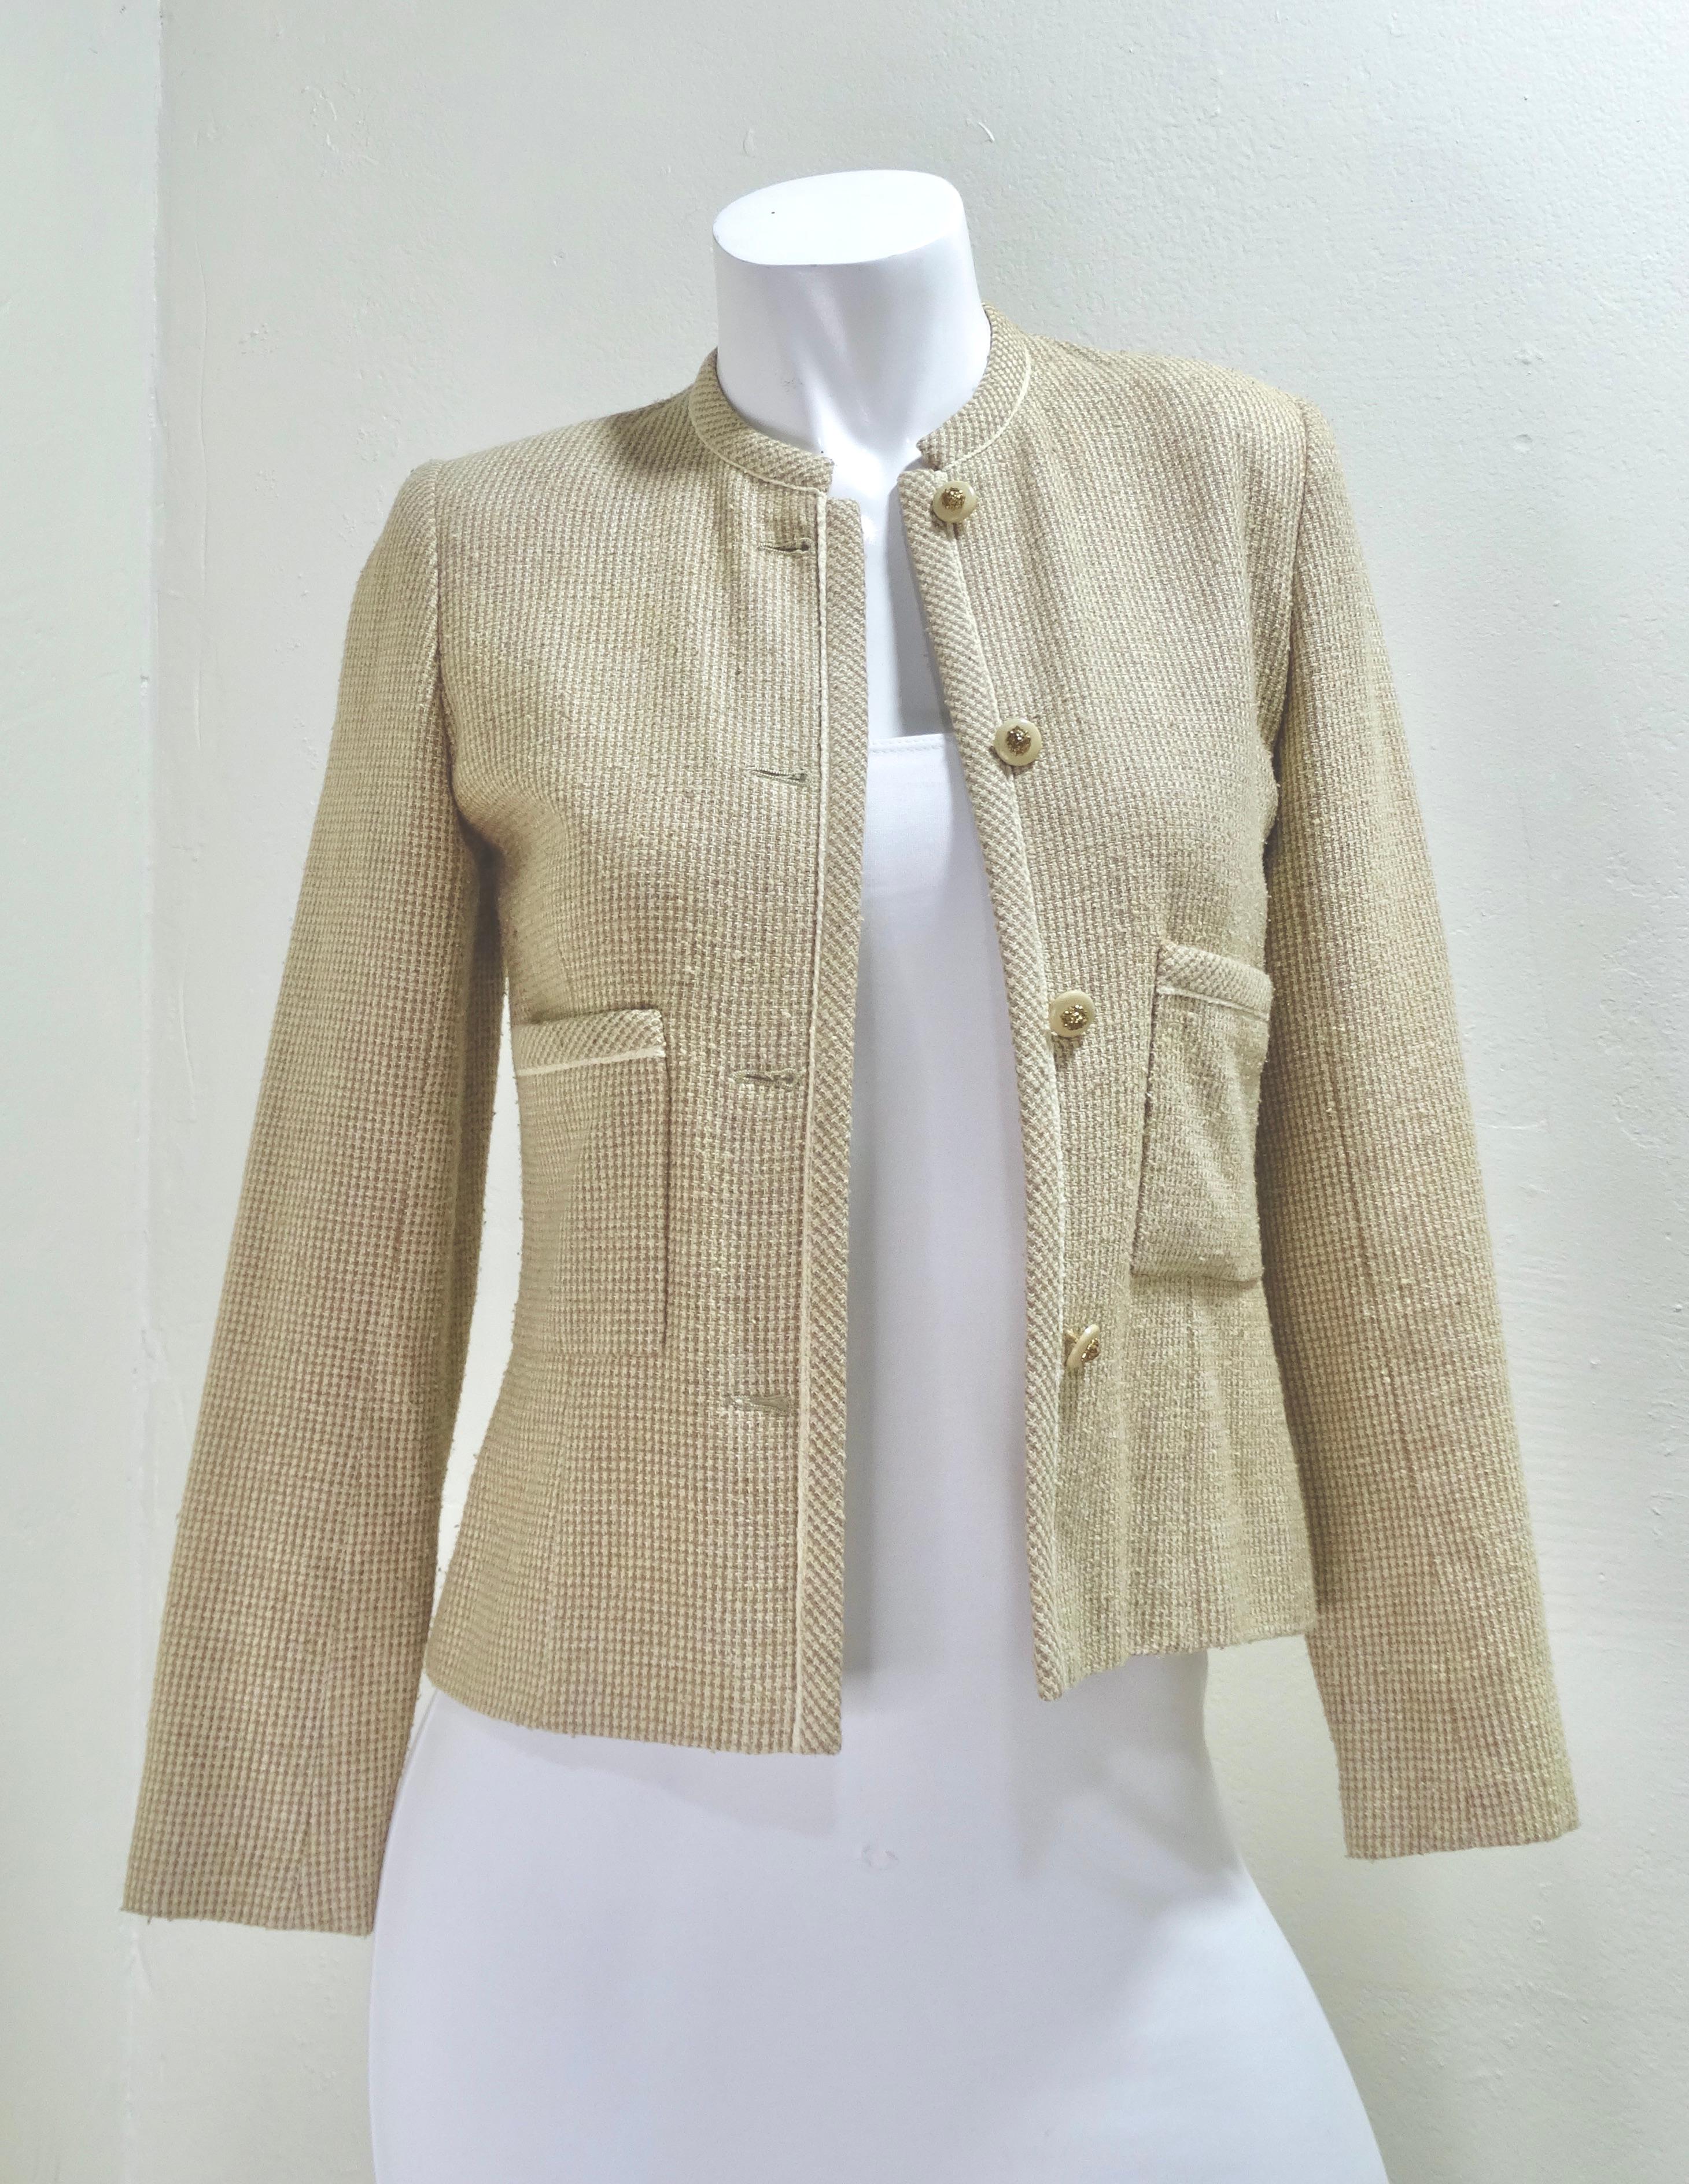 A true Chanel Collectors vintage piece straight from the 1980's! This beige color is perfect for everyday wear and will match every color in your closet. This jacket features a beige and white woven tweed, two front pockets, four beautifully